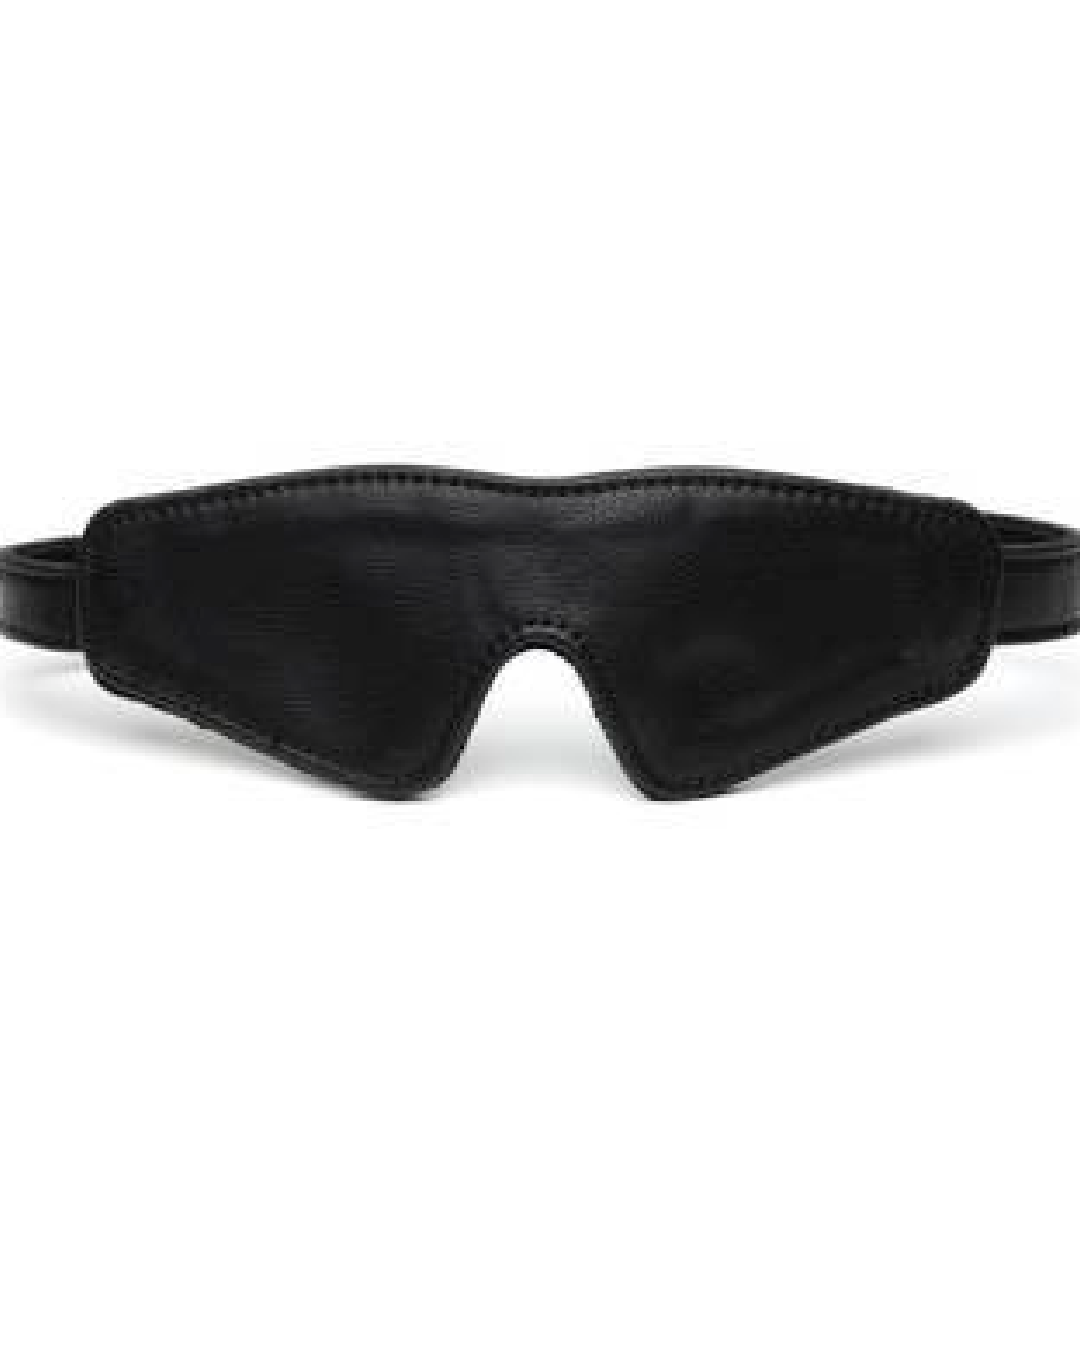 Fifty Shades of Grey Bound to You Blindfold  on white background 